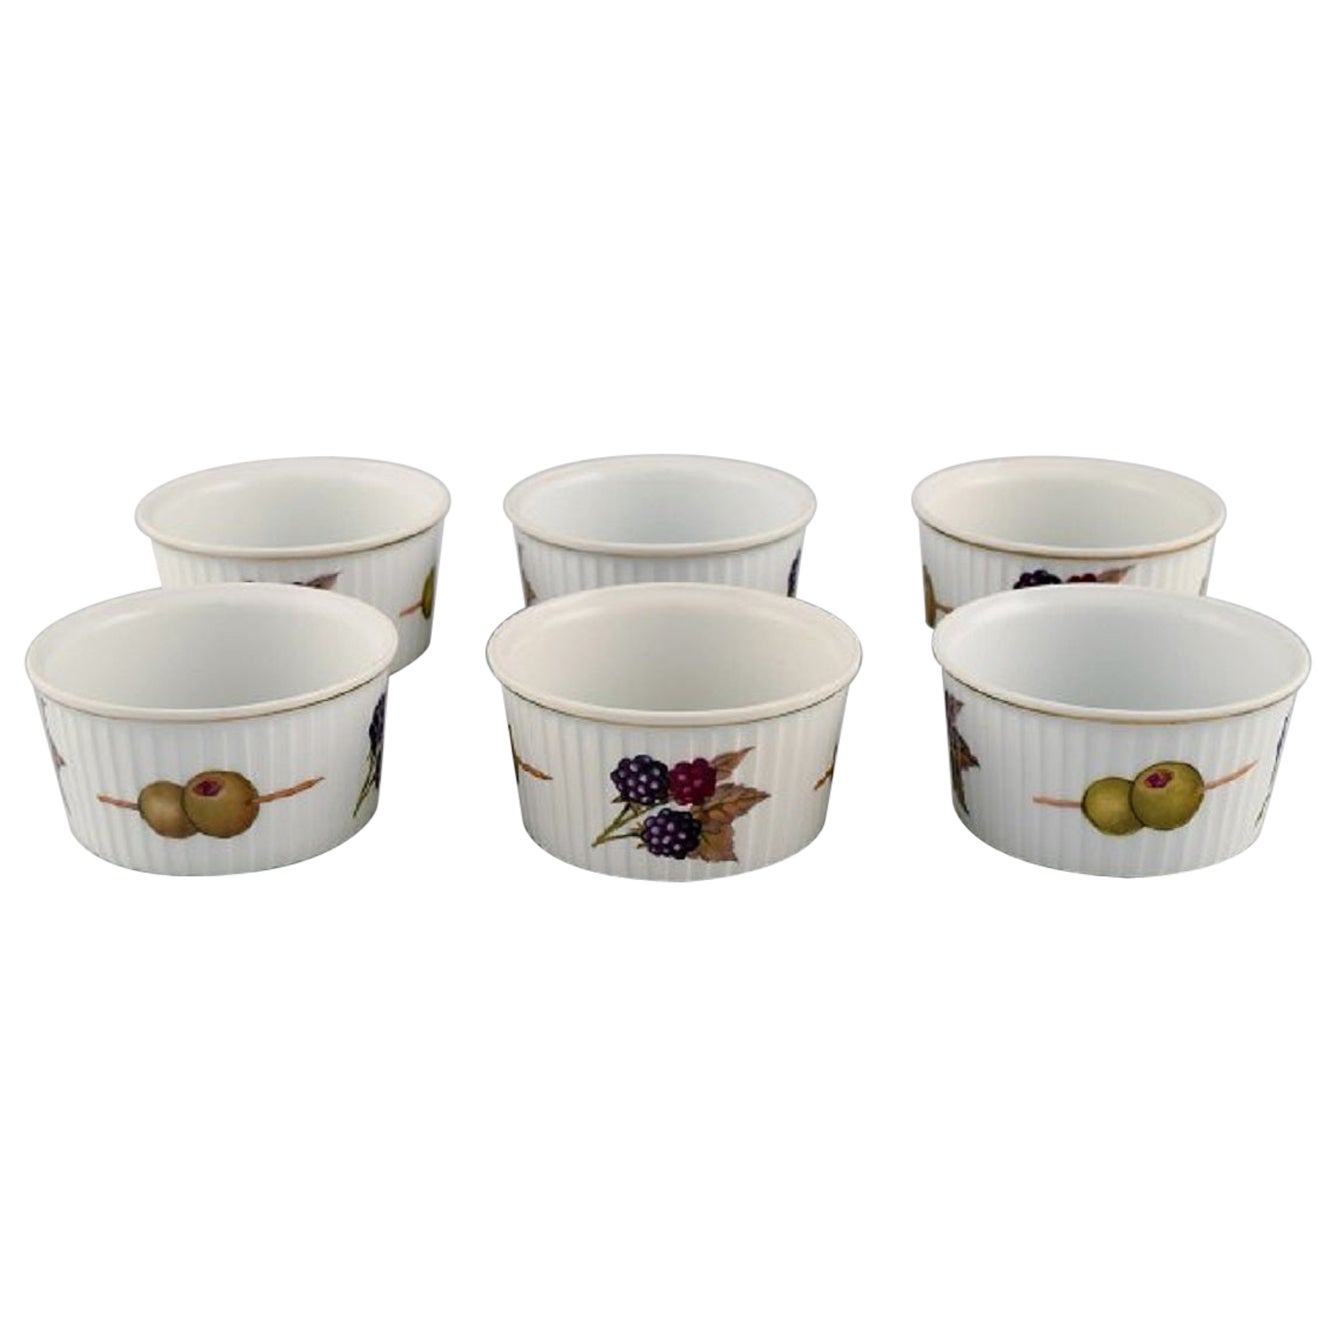 Royal Worcester, England, Six Small Evesham Porcelain Bowls with Fruits For Sale